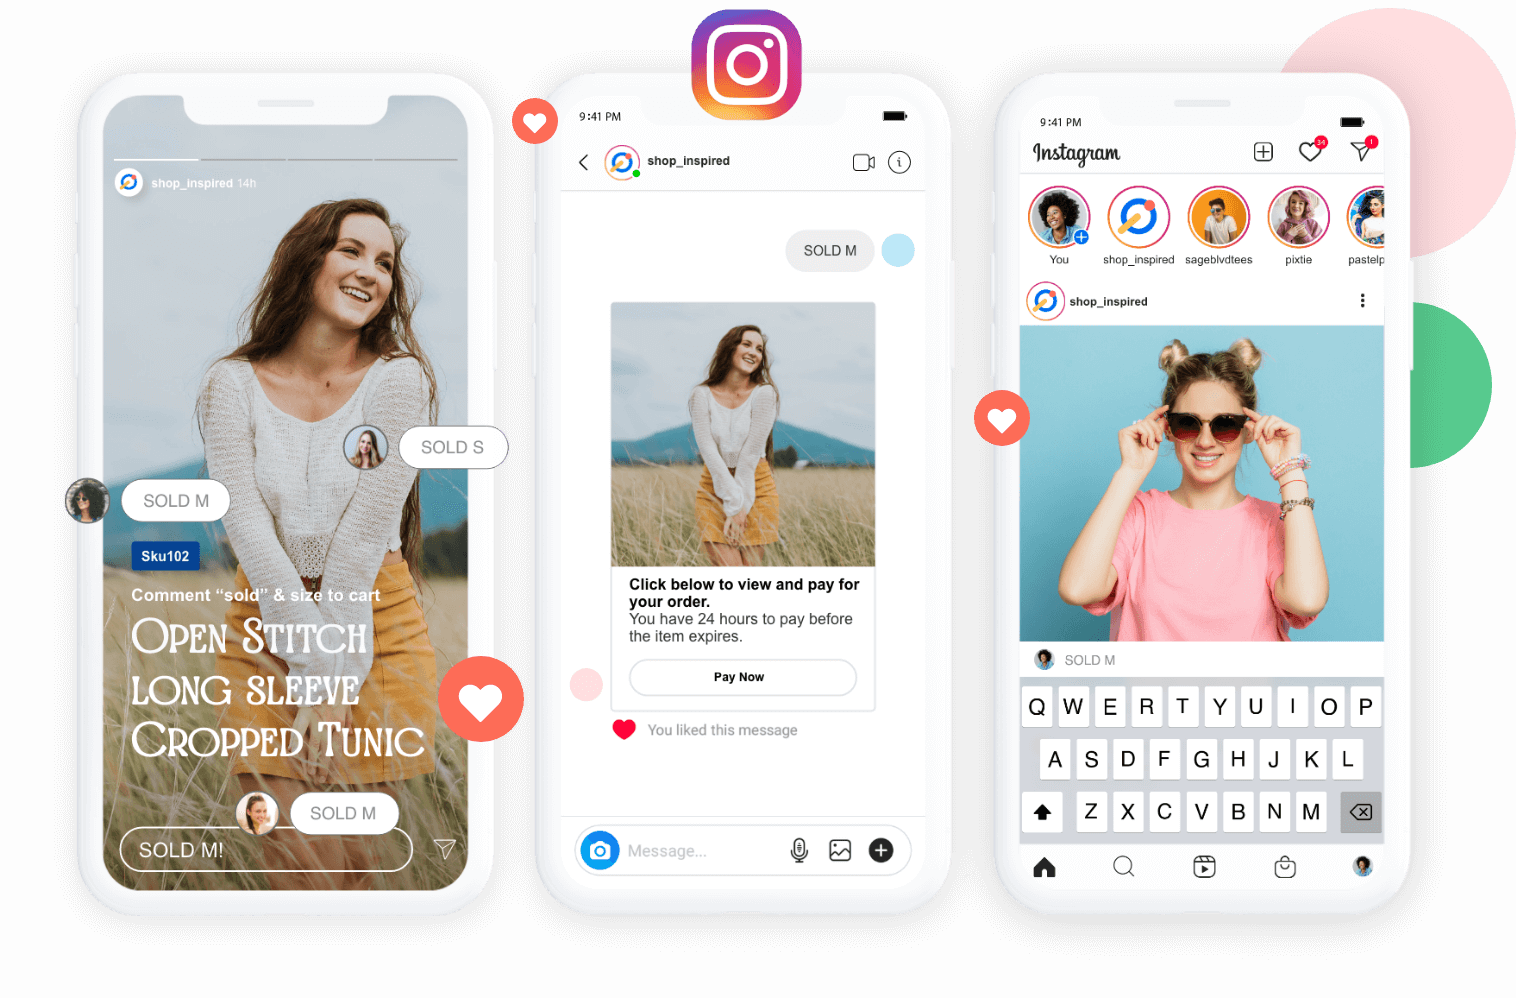 comment selling on Instagram stories and posts